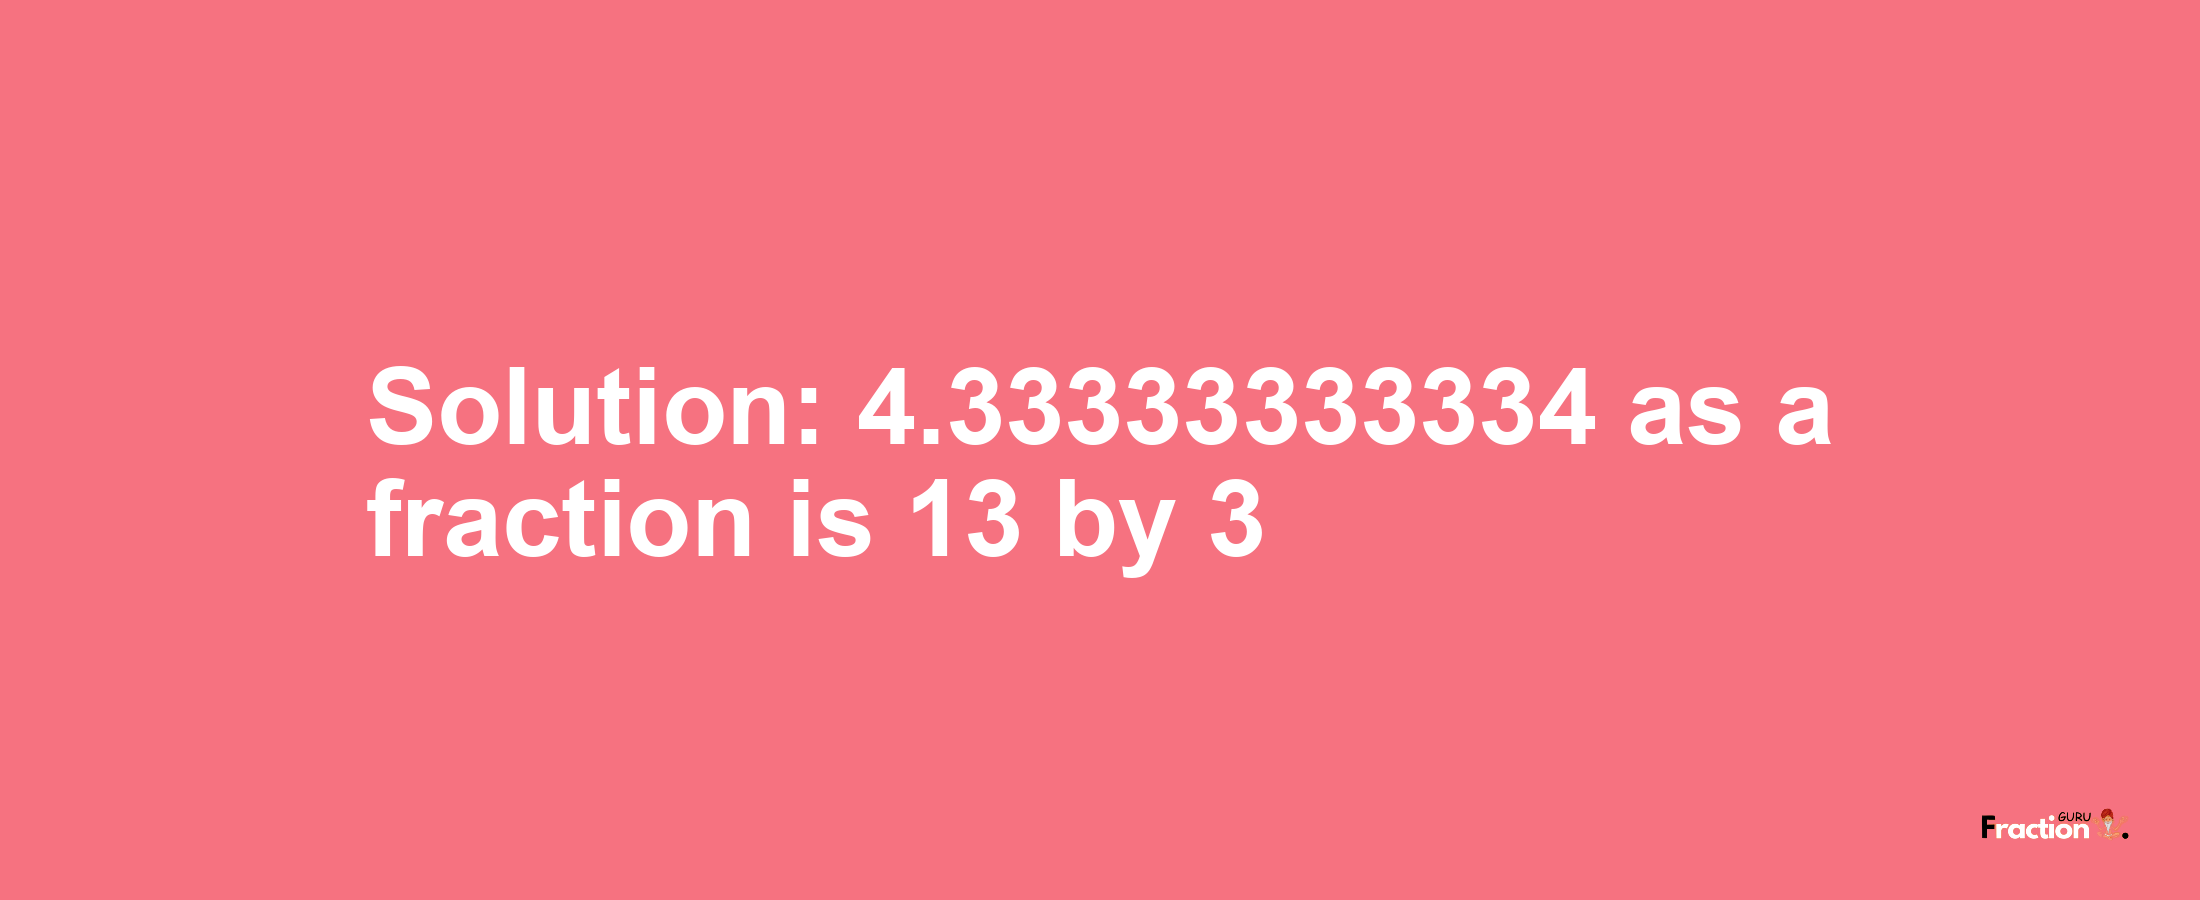 Solution:4.33333333334 as a fraction is 13/3